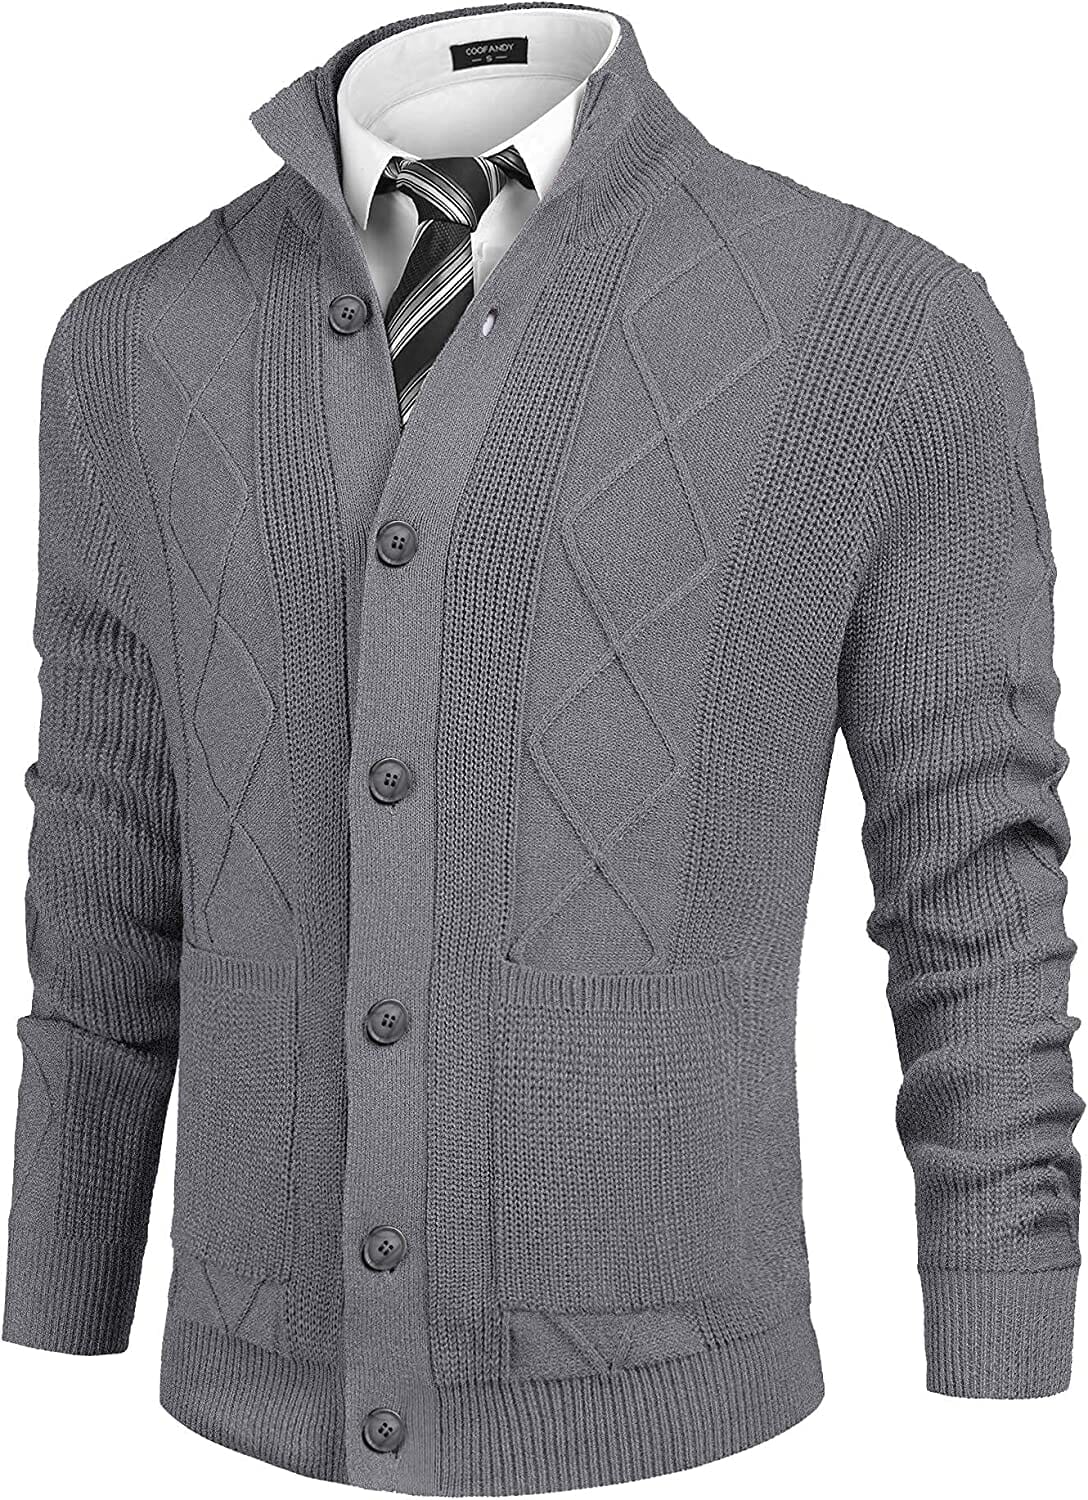 Casual Stand Collar Button Down Cardigan with Pockets (US Only) Cardigans COOFANDY Store Gray S 